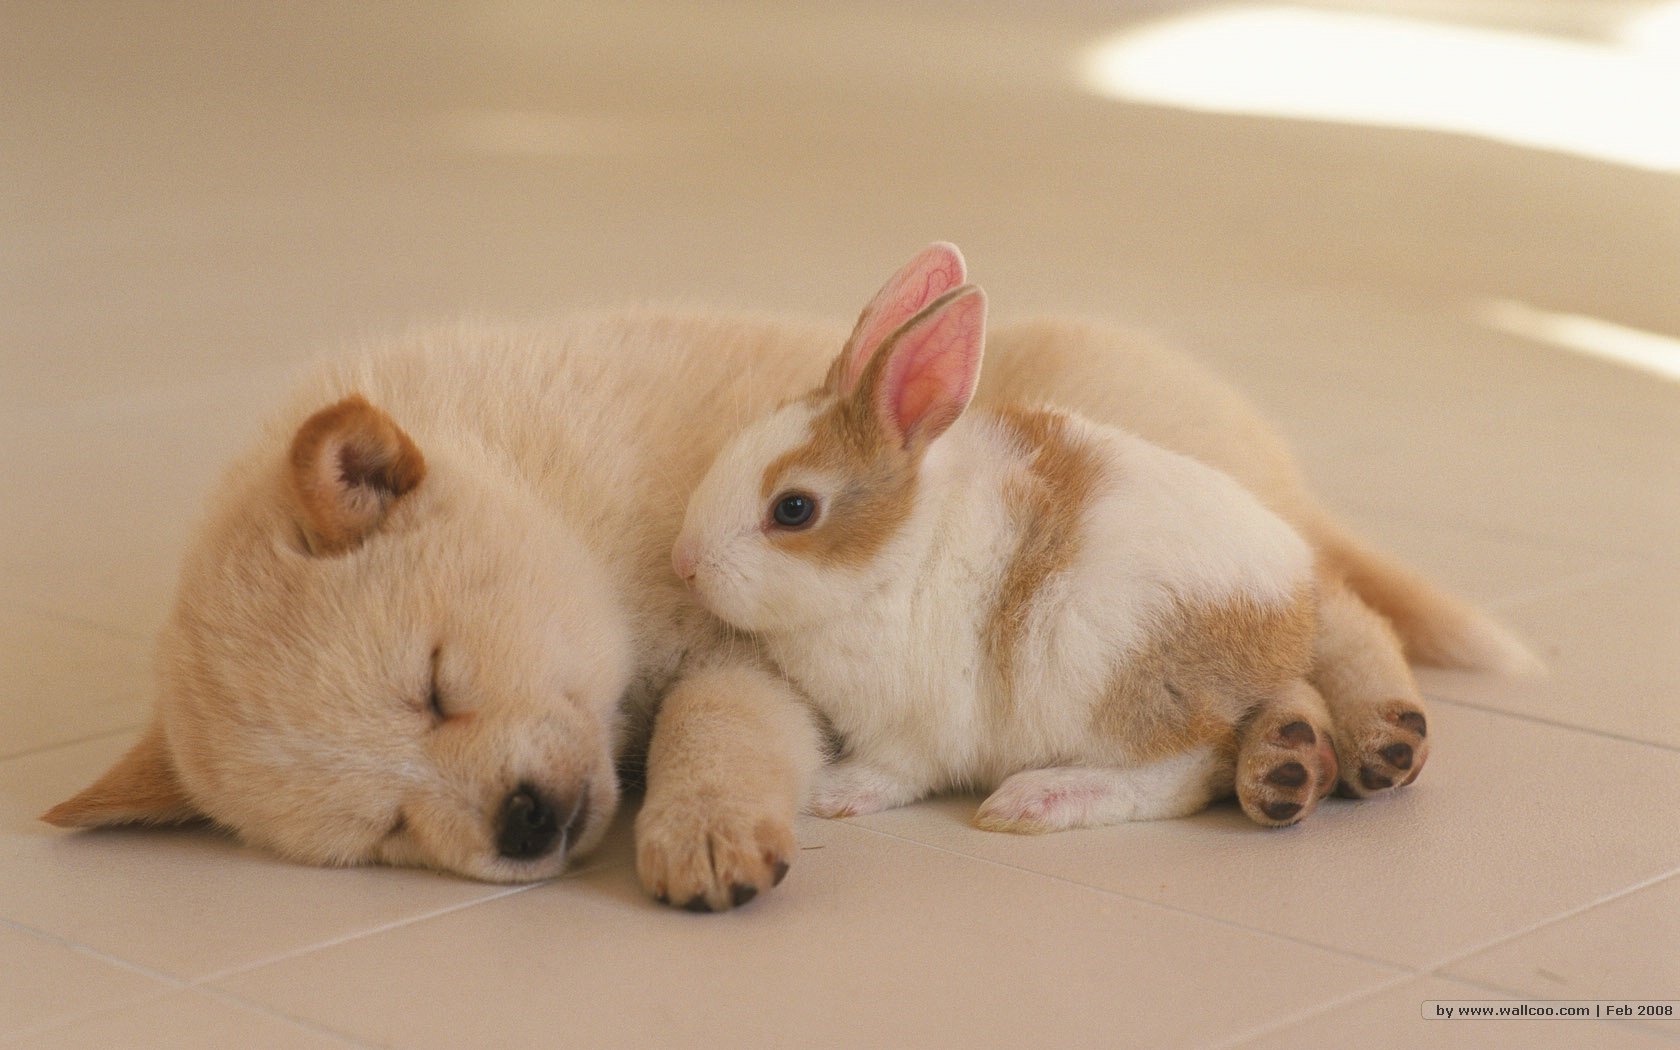 bunnies, Animals, Dogs, Puppies, Rabbits, Canine, Sleeping, Closed, Eyes Wallpaper